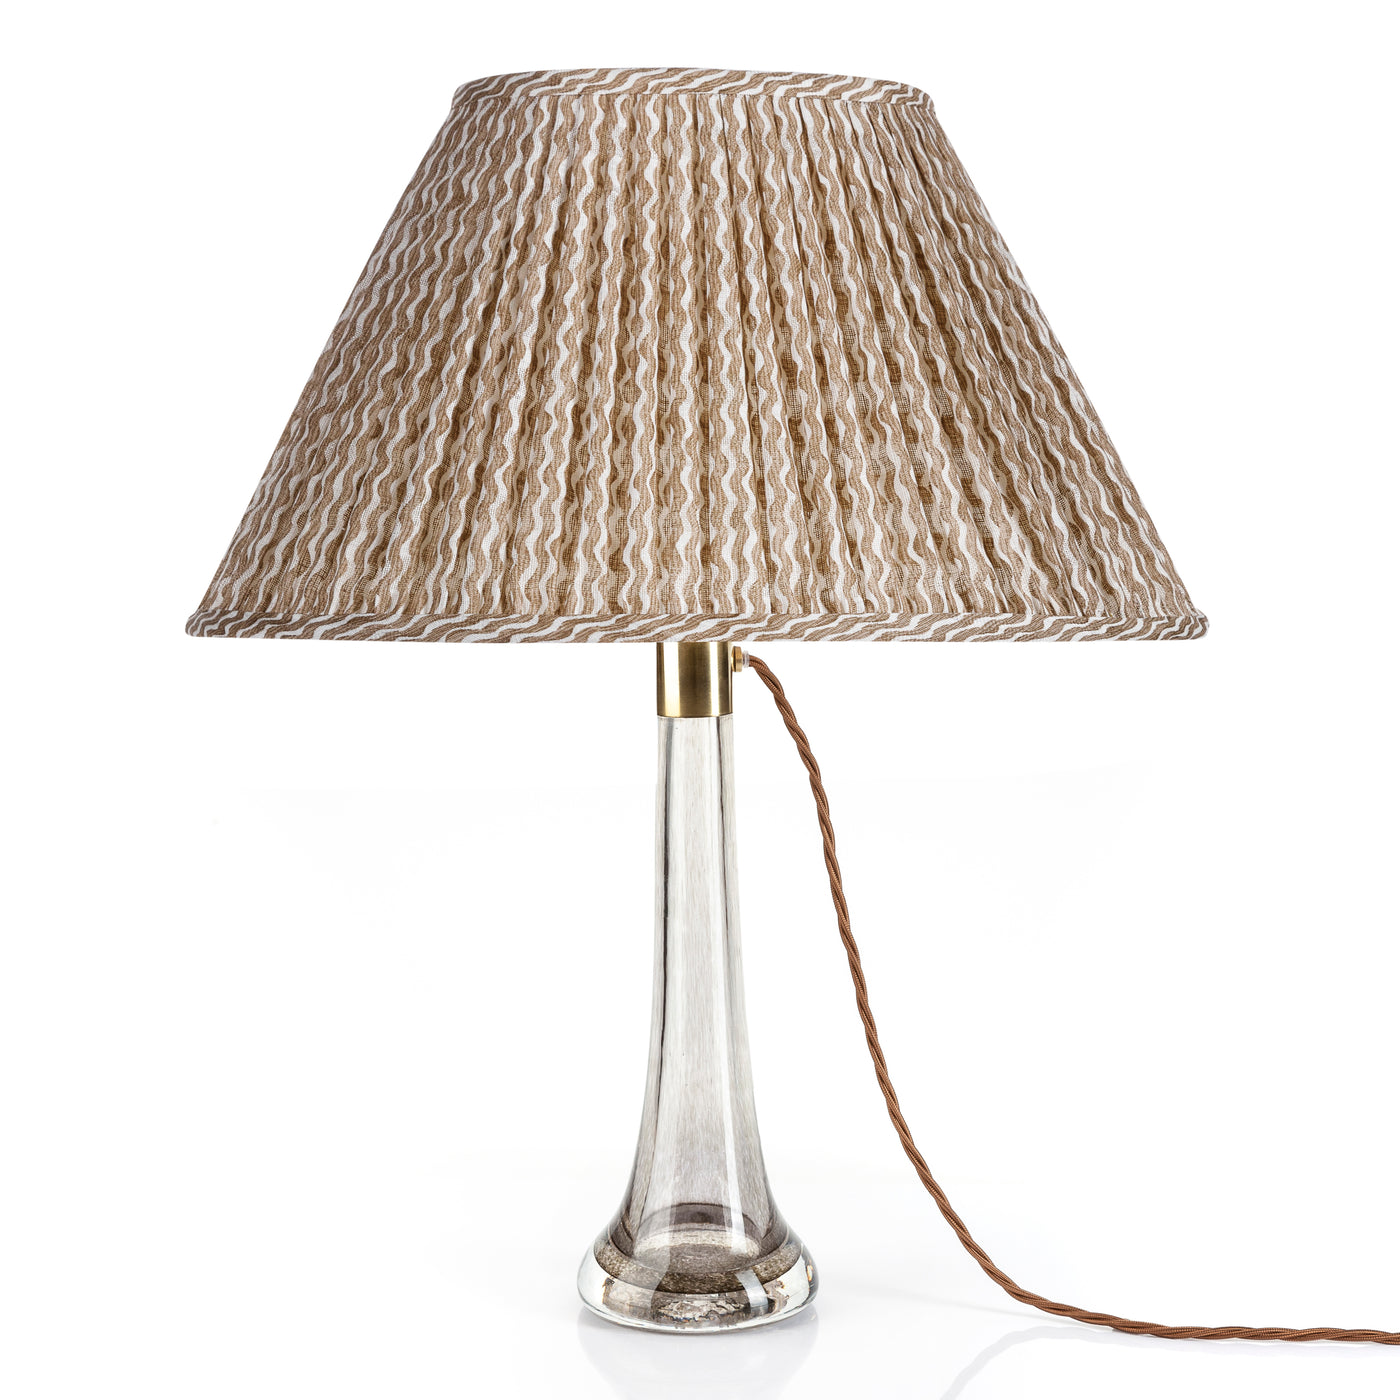 14" Oval Fermoie Lampshade - Popple in Nut Brown | Newport Lamp And Shade | Located in Newport, RI